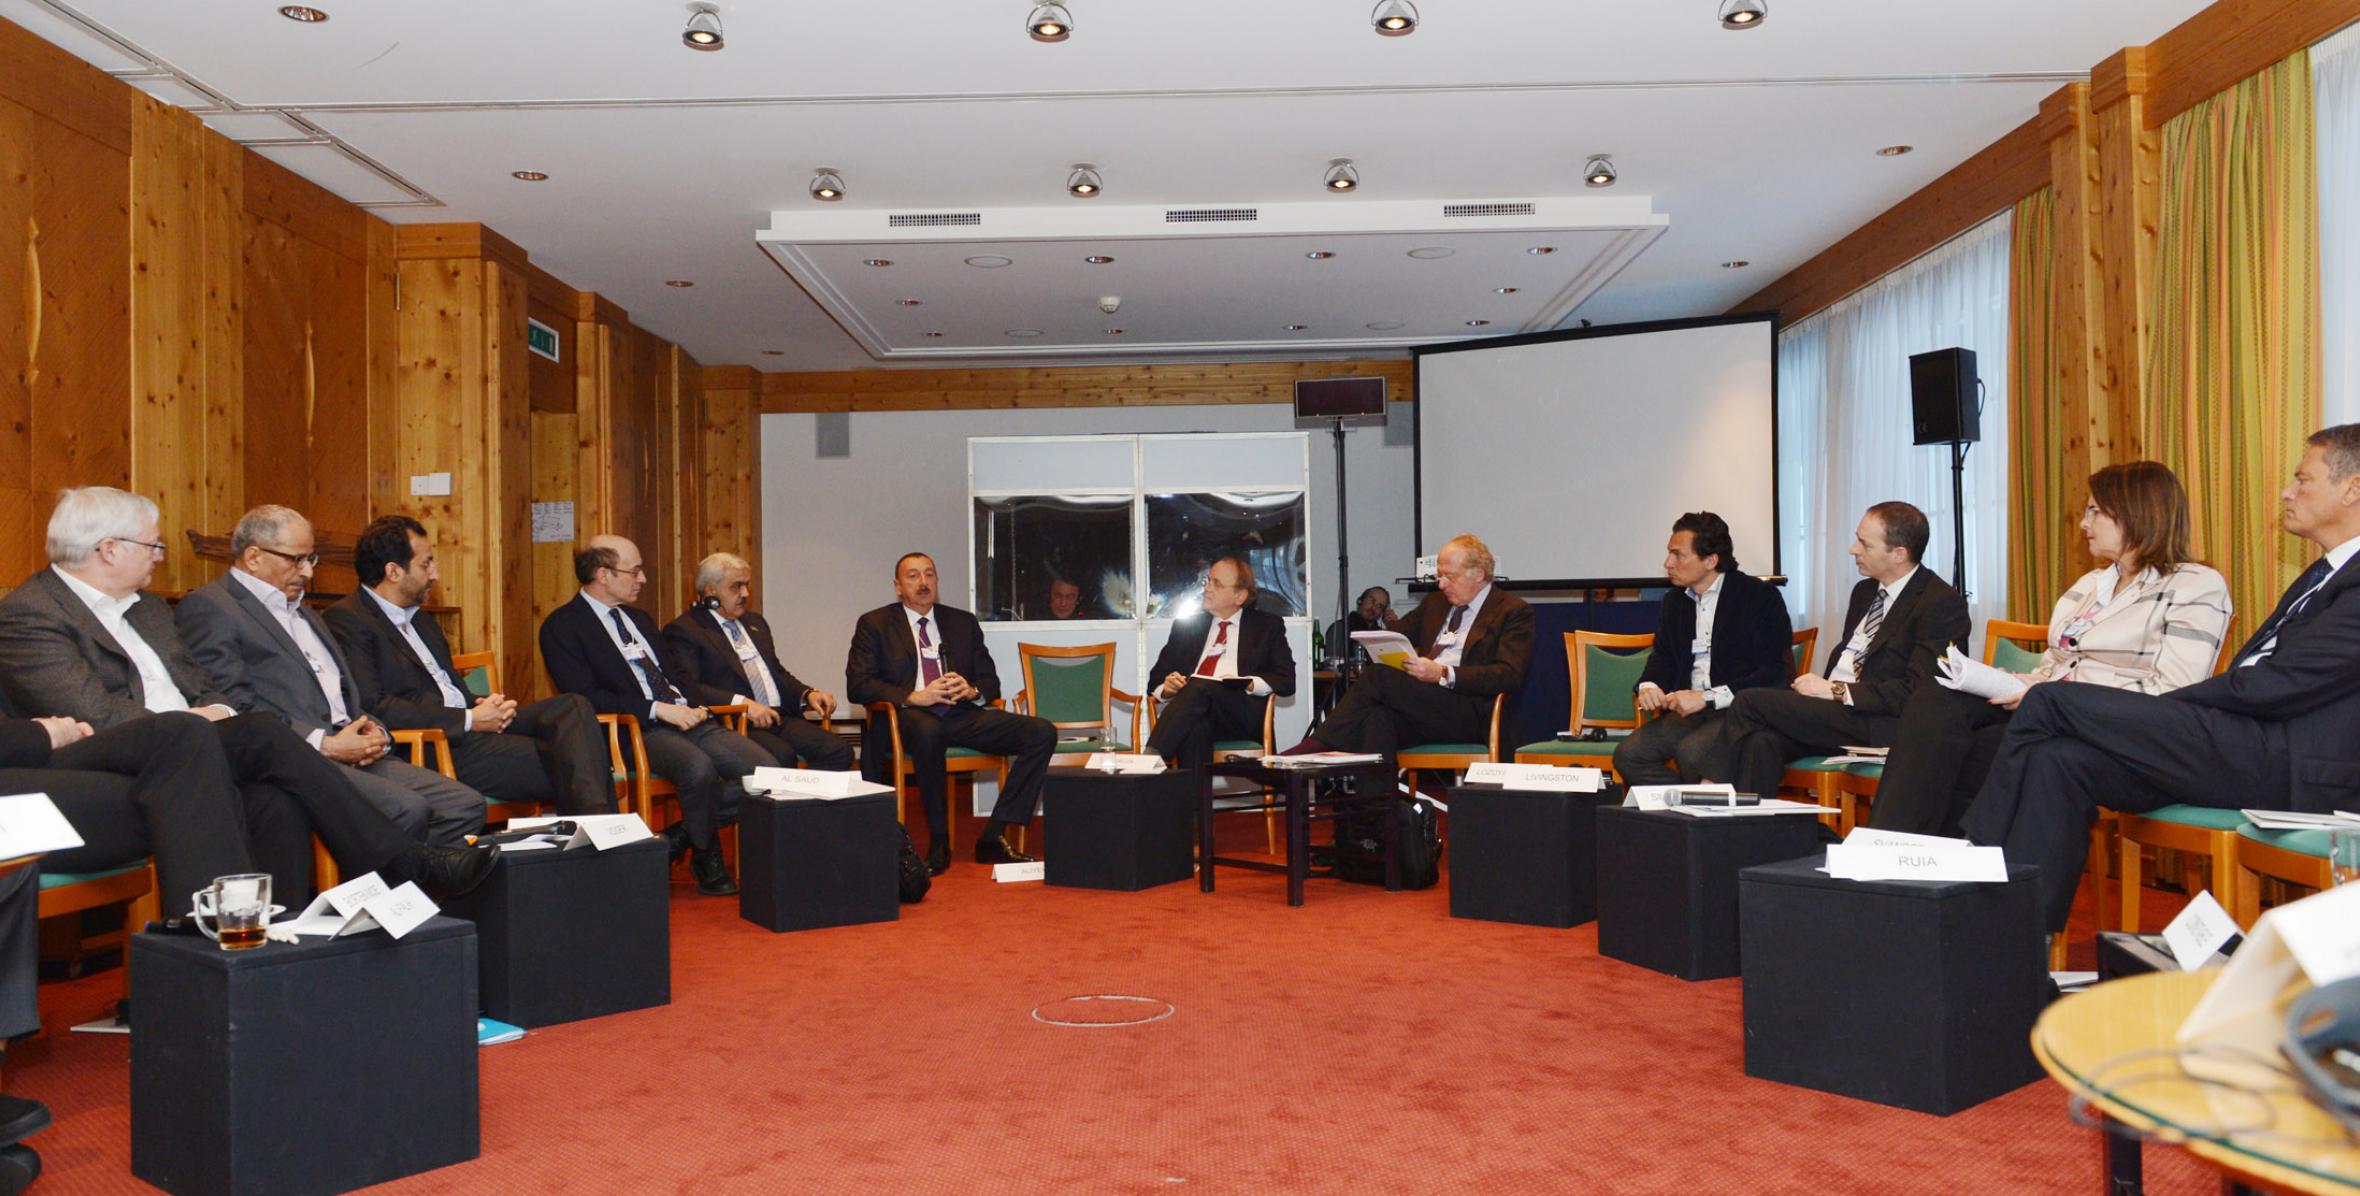 Ilham Aliyev attended a session called a “Meeting of Oil and Gas Executives” of the World Economic Forum in Davos